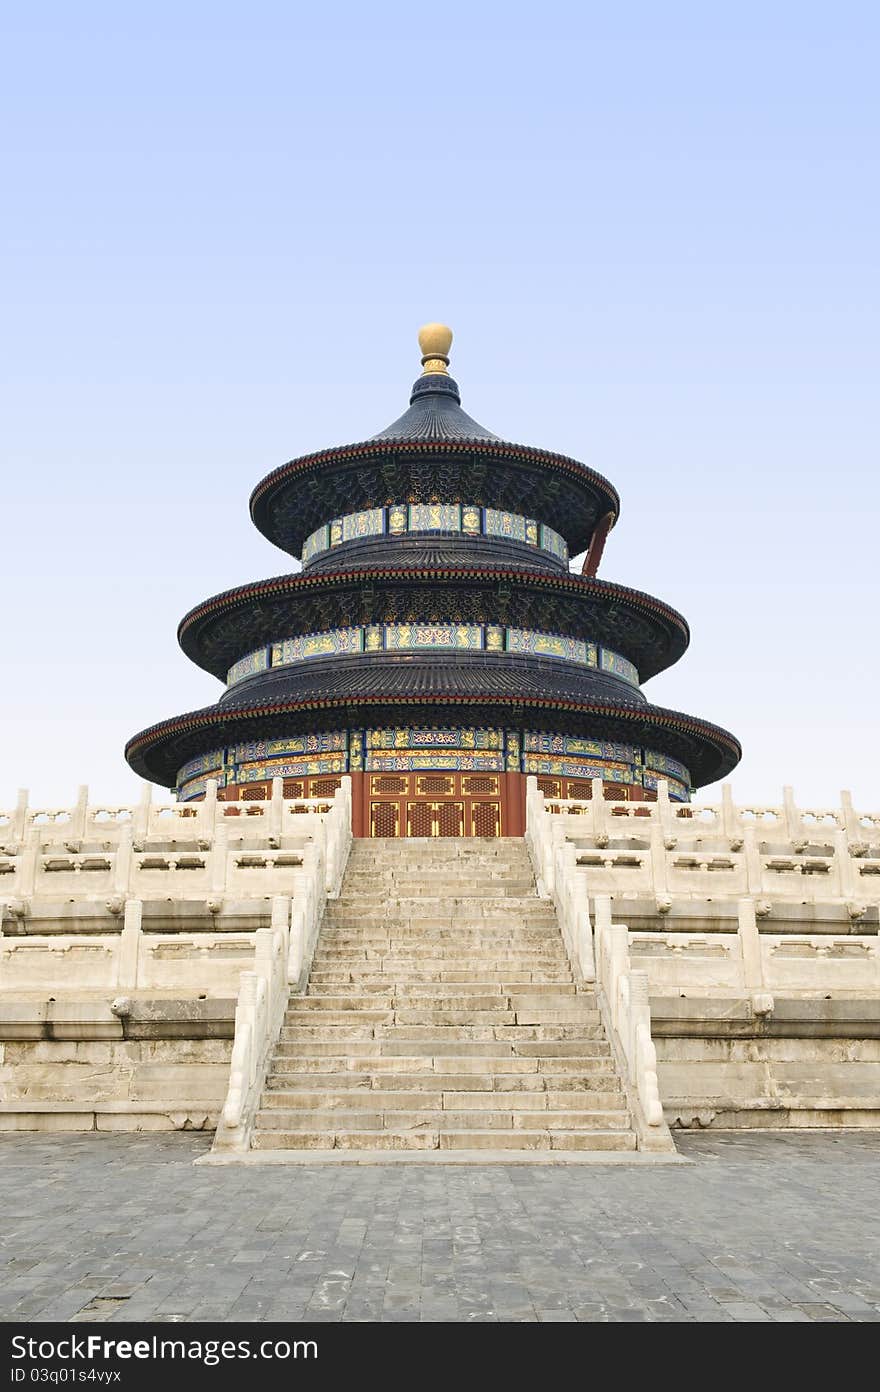 Temple of Heaven The Hall of Prayer for Good Harvest. Temple of Heaven The Hall of Prayer for Good Harvest